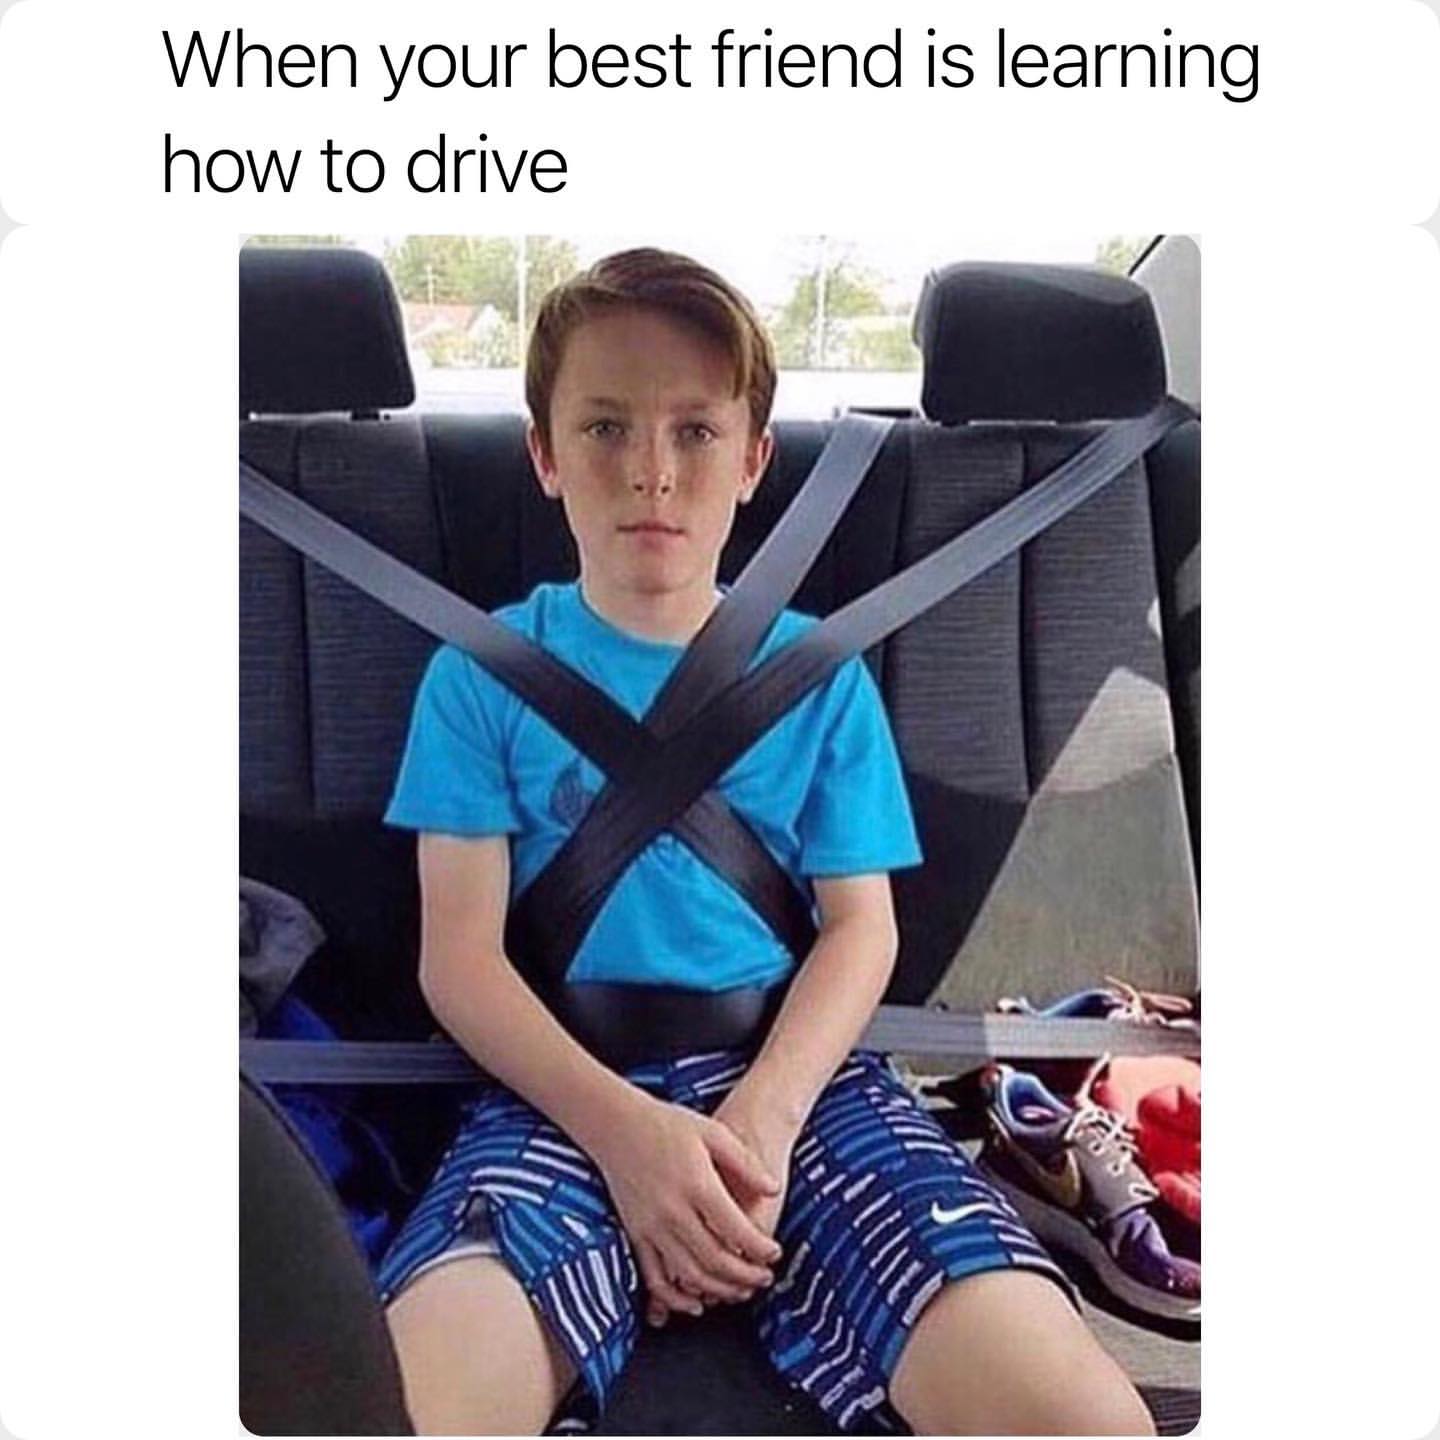 When your best friend is learning how to drive.